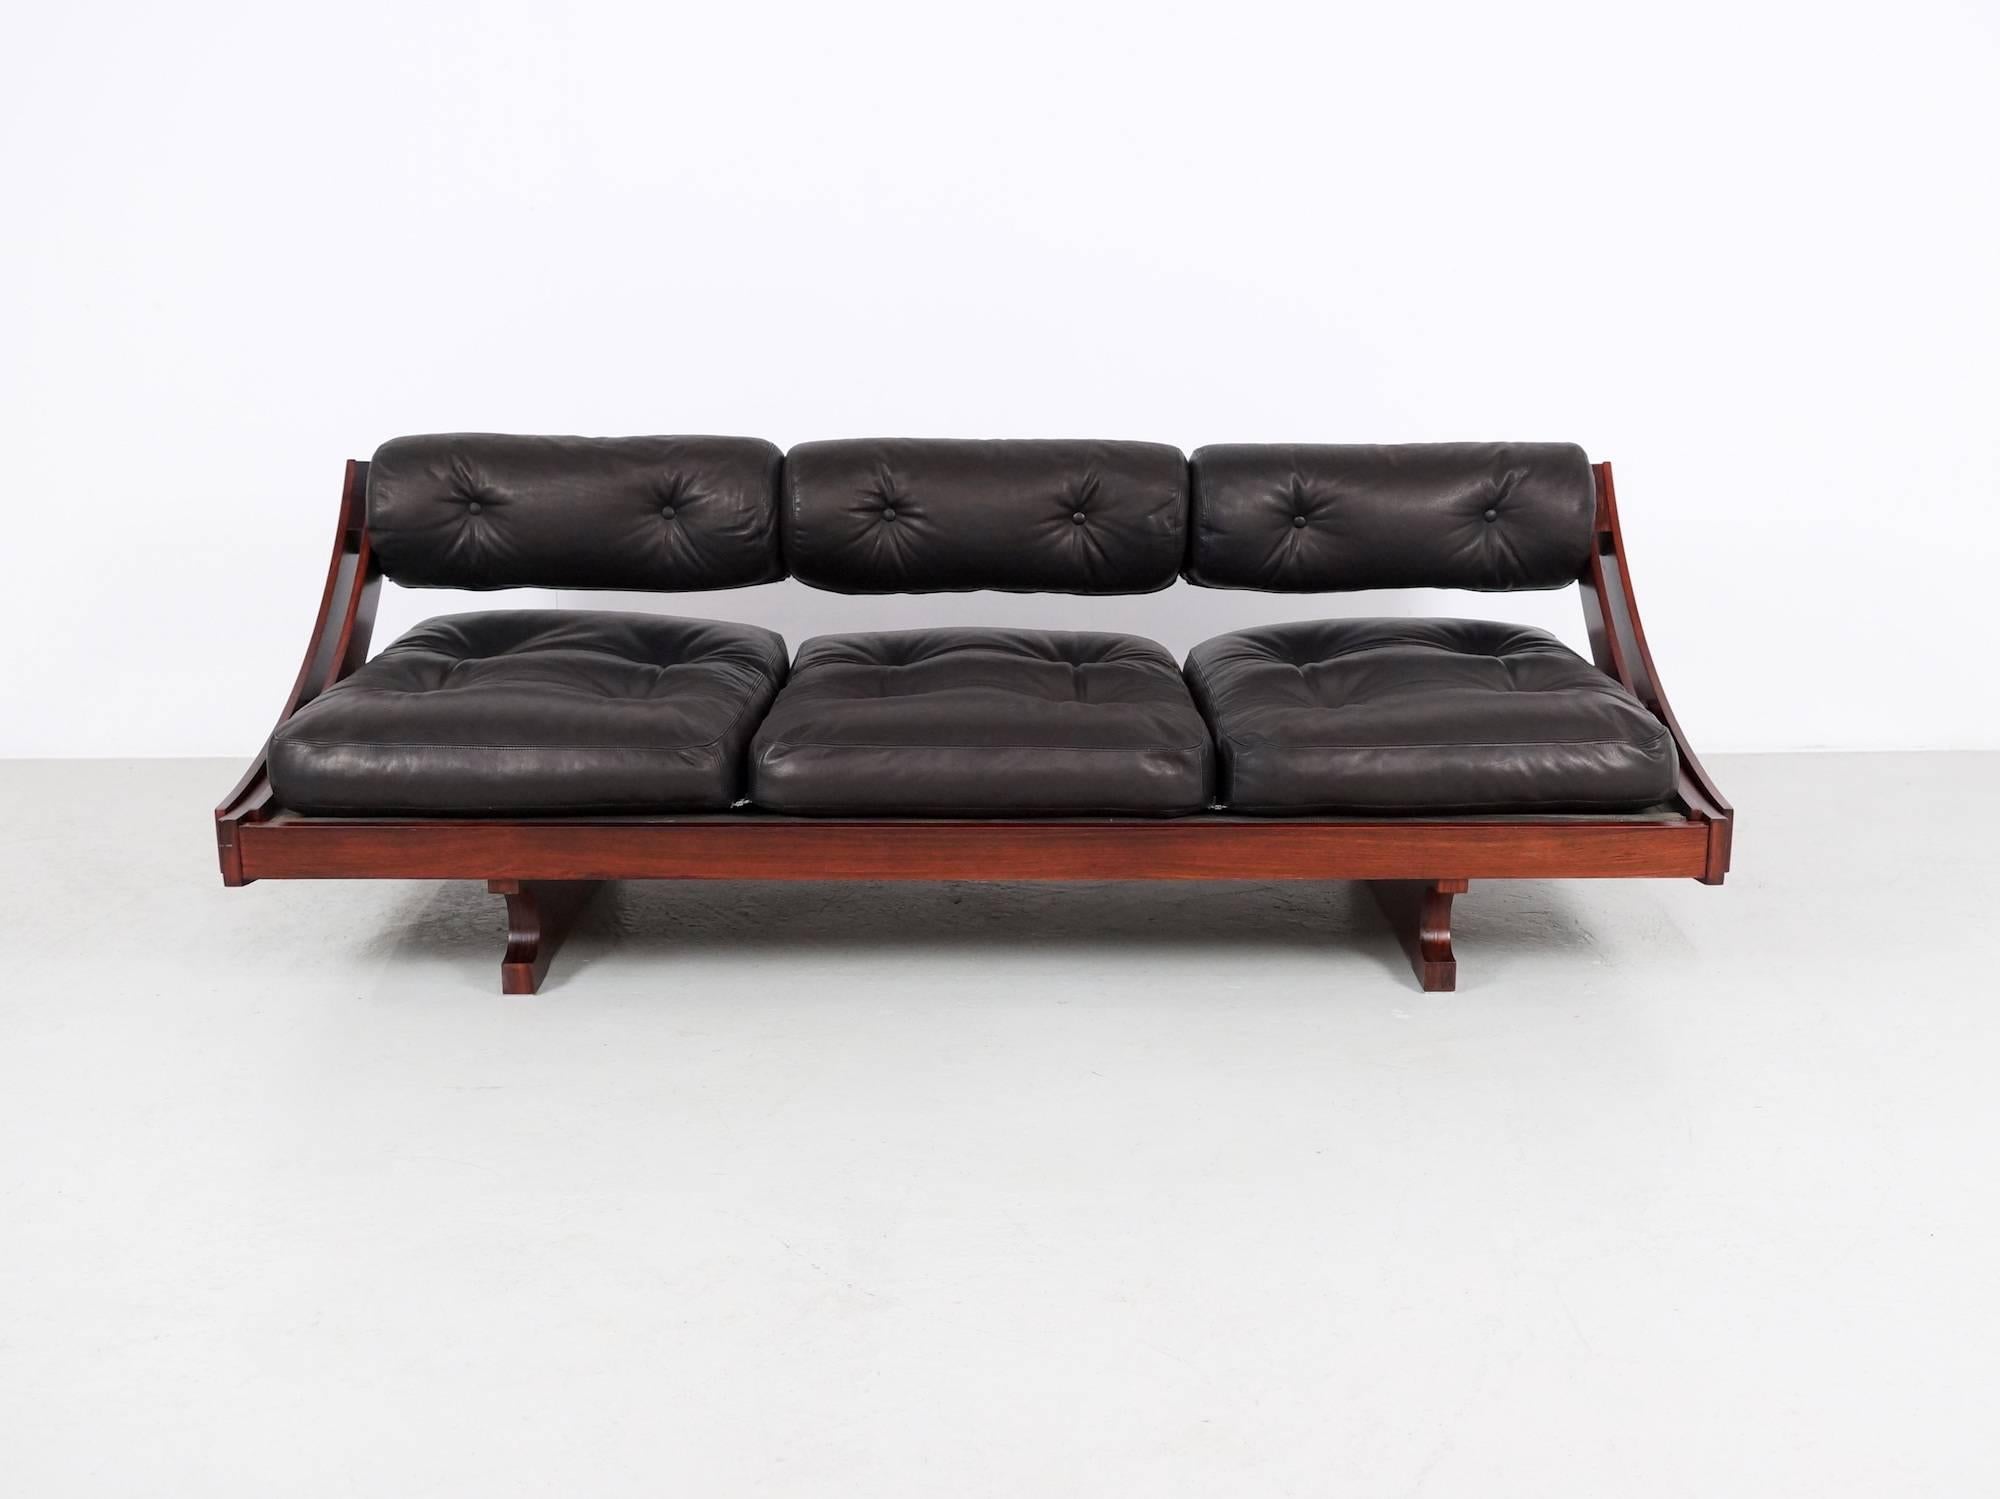 Beautifull sofa daybed designed for Sormani in 1963 by Gianni Songia 
This sofa daybed, model GS 195 was bought in 1973. 
The lacquered rosewood veneer wooden frame has a internal removable metal frame and leather upholstered cushions. 
The